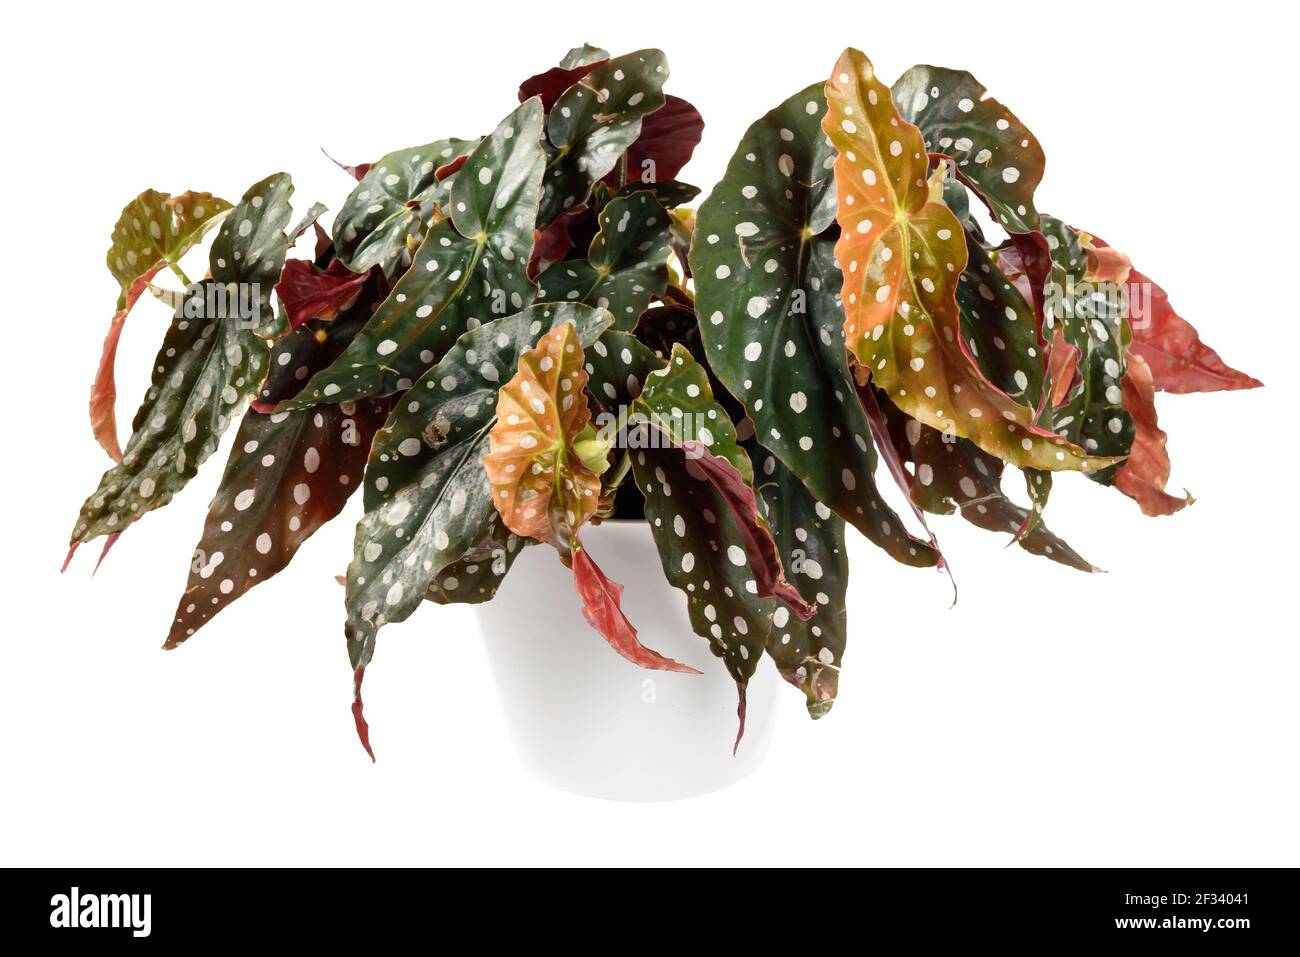 Showy Begonia maculata plant with its ornamental spotted variegated leaves potted in a container isolated on white in a close up side view Stock Photo